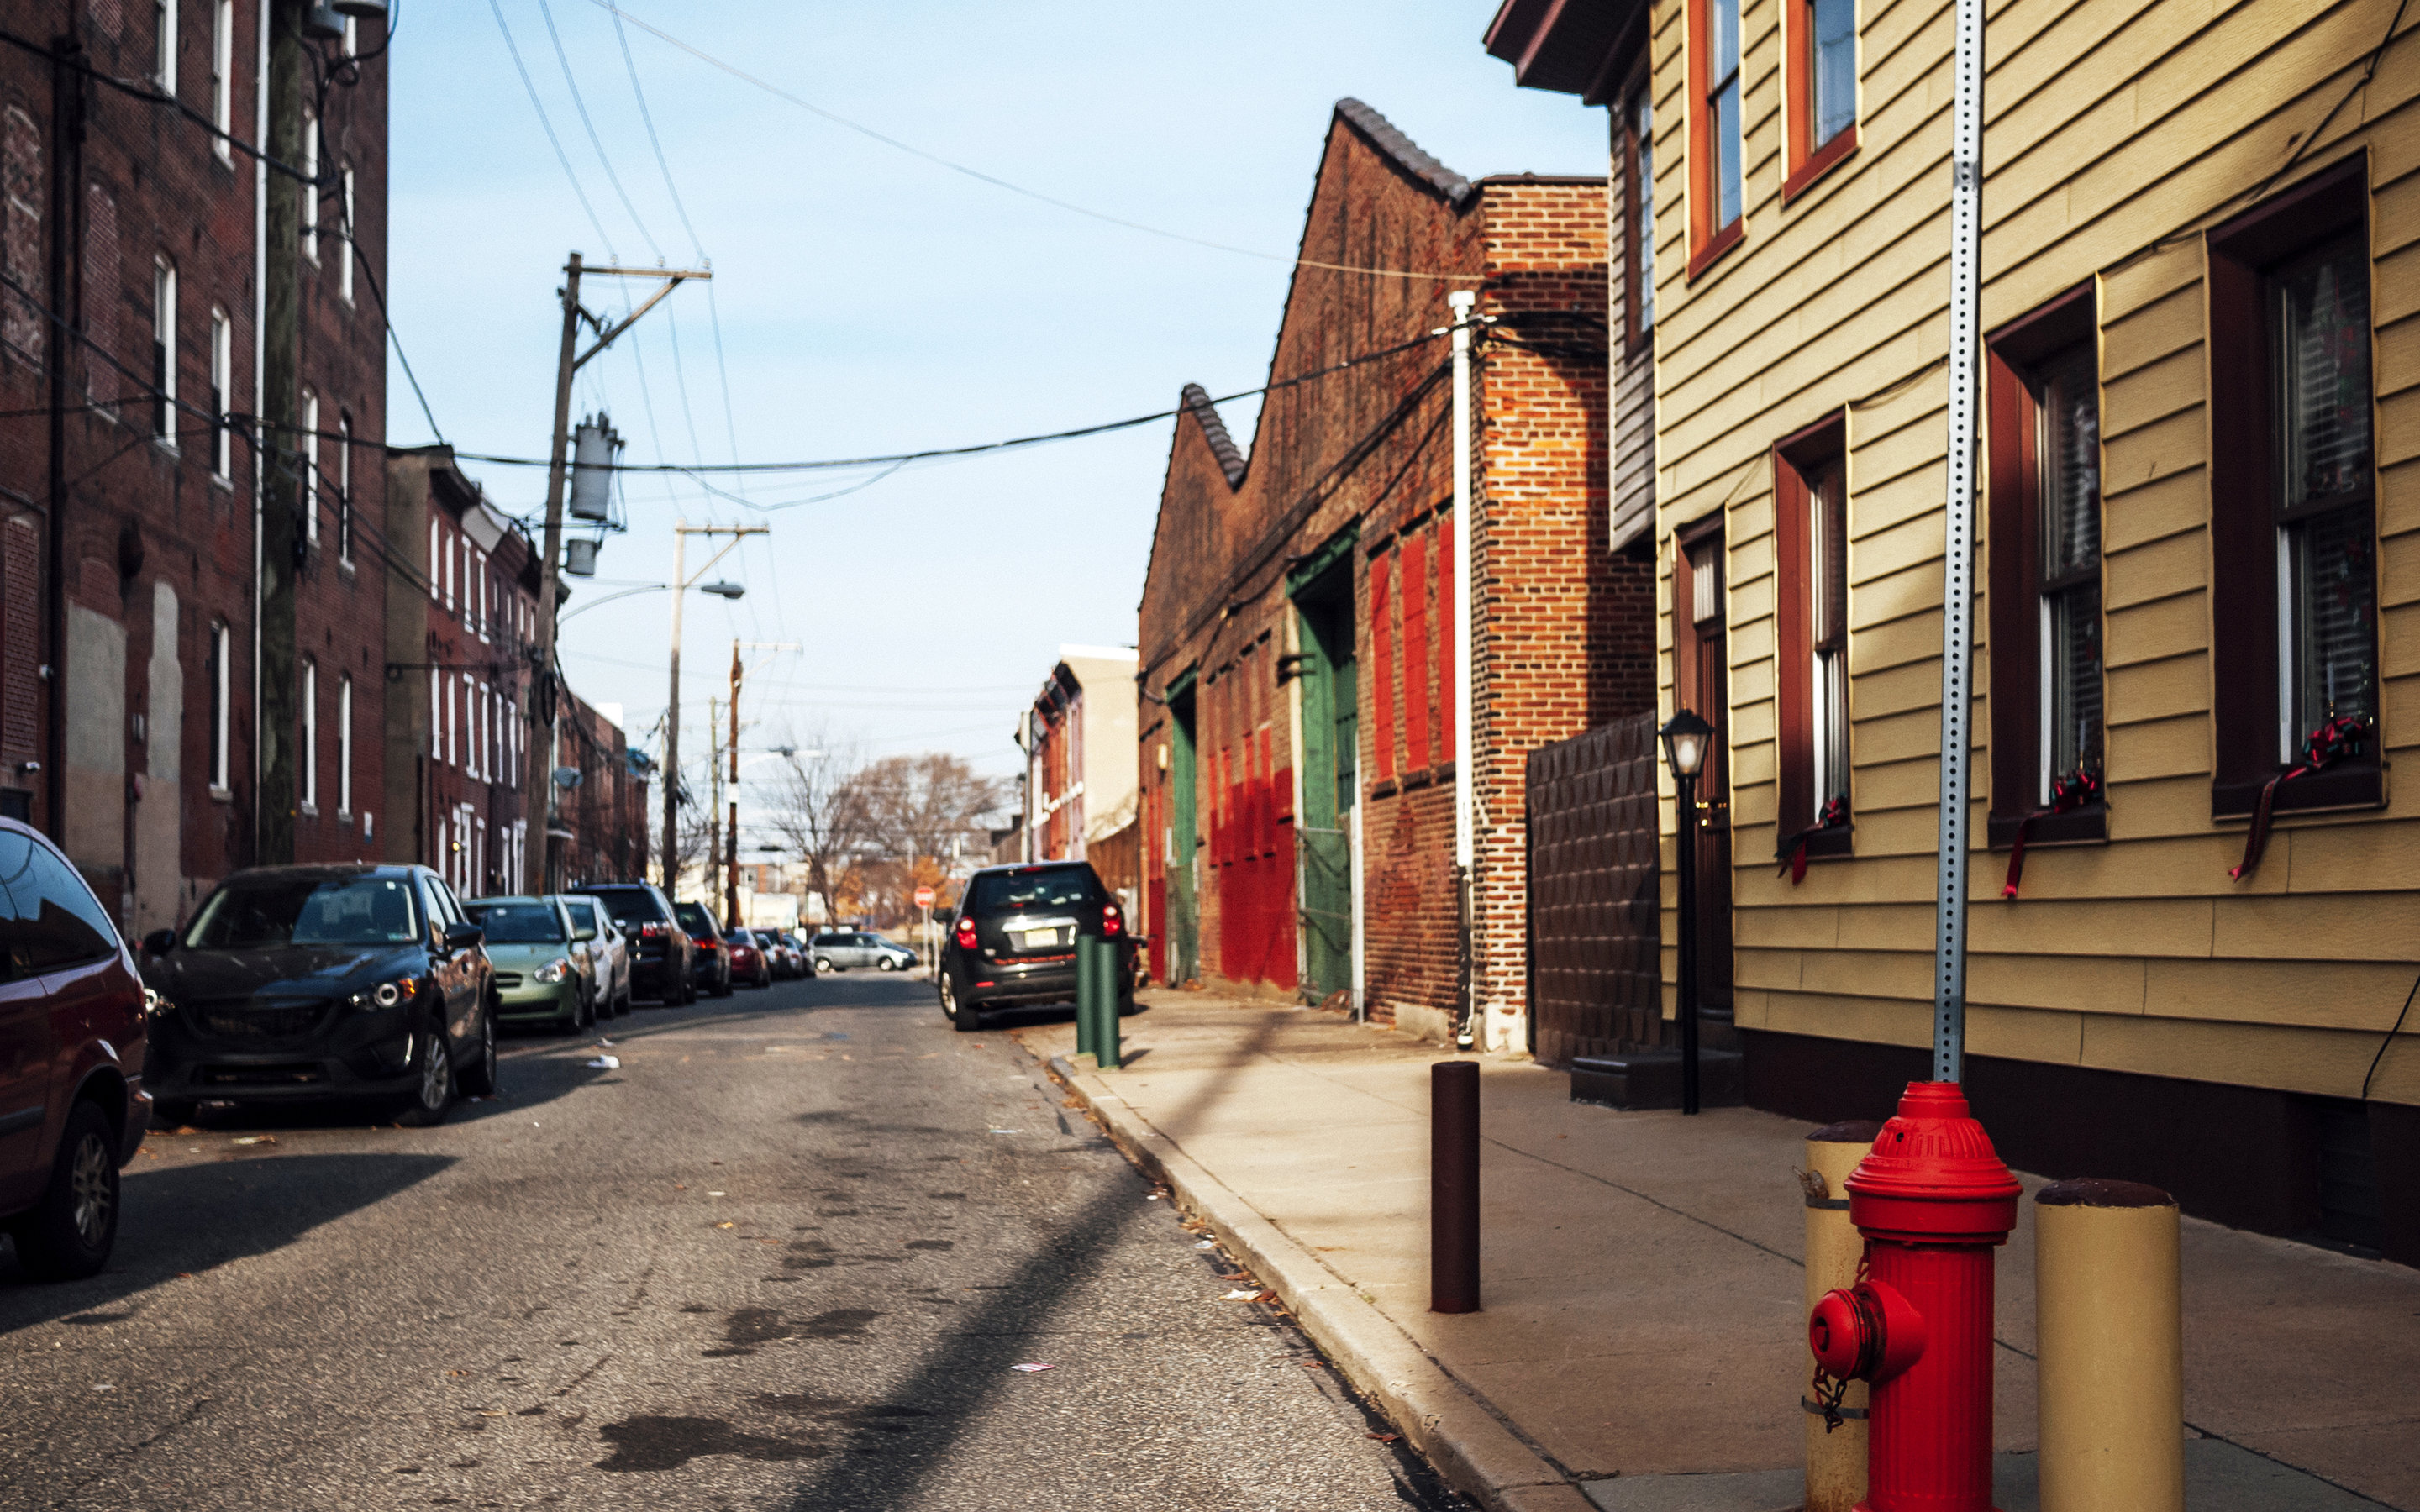 Streets of North Philadelphia - stock photo (Getty Images)